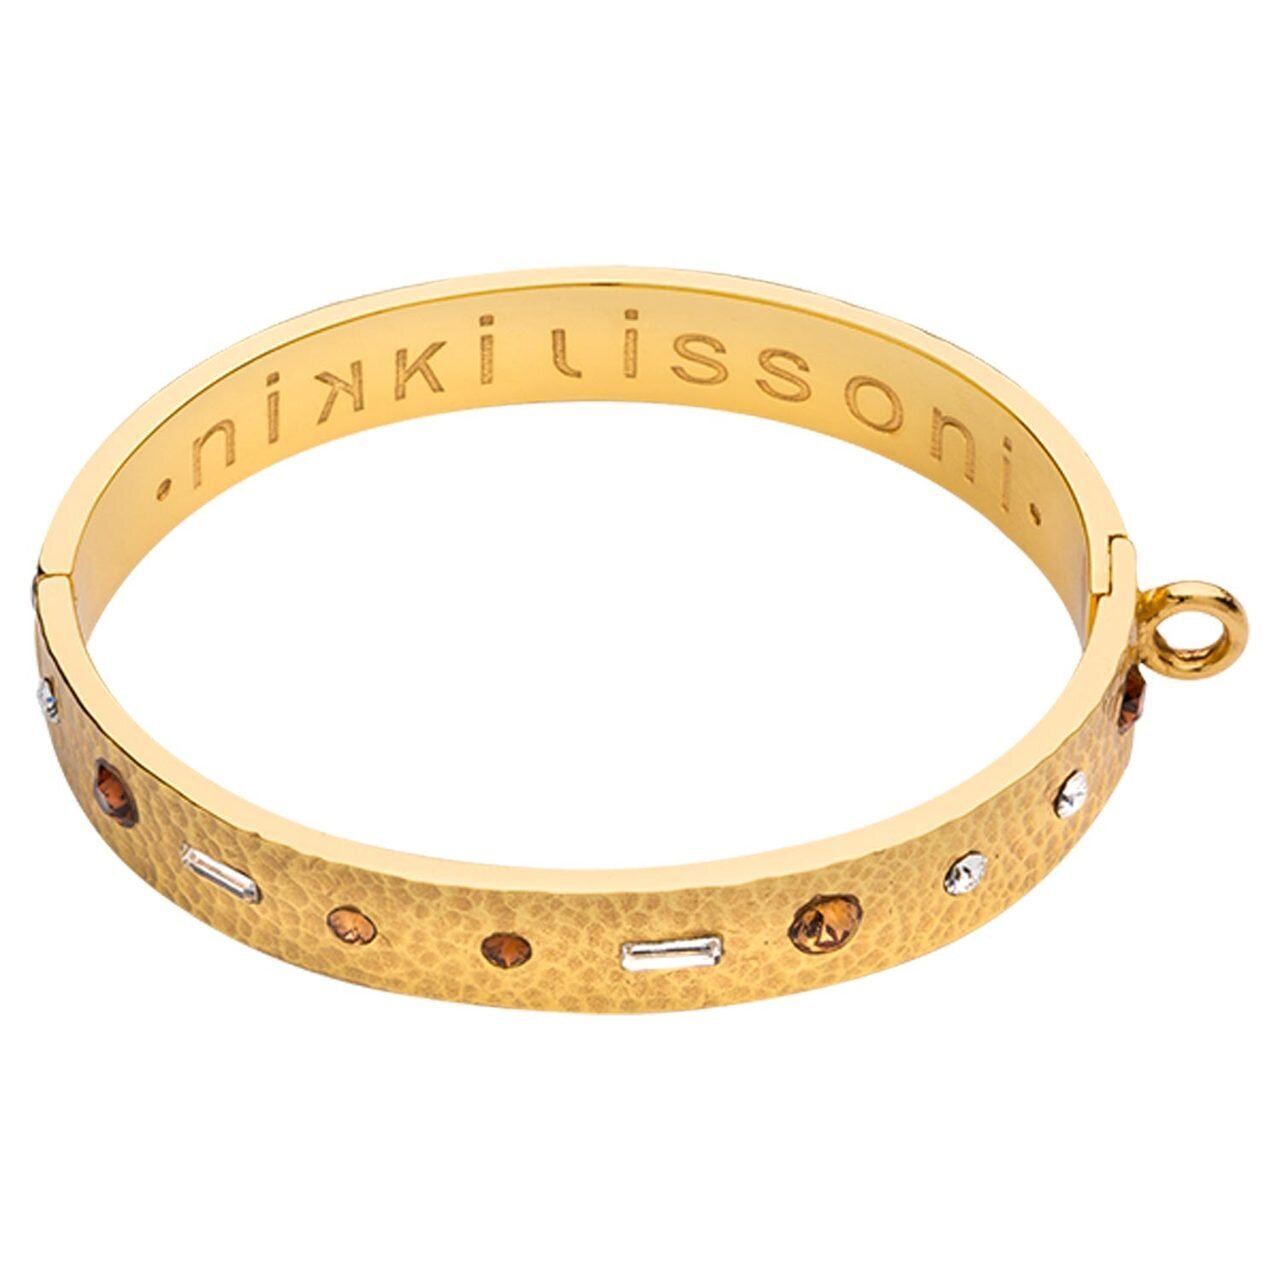 Nikki Lissoni Hammered Bangle of 14mm with Swarovski Crystals One Loop To Attach A Charm Gold-plated 17cm B1161G17